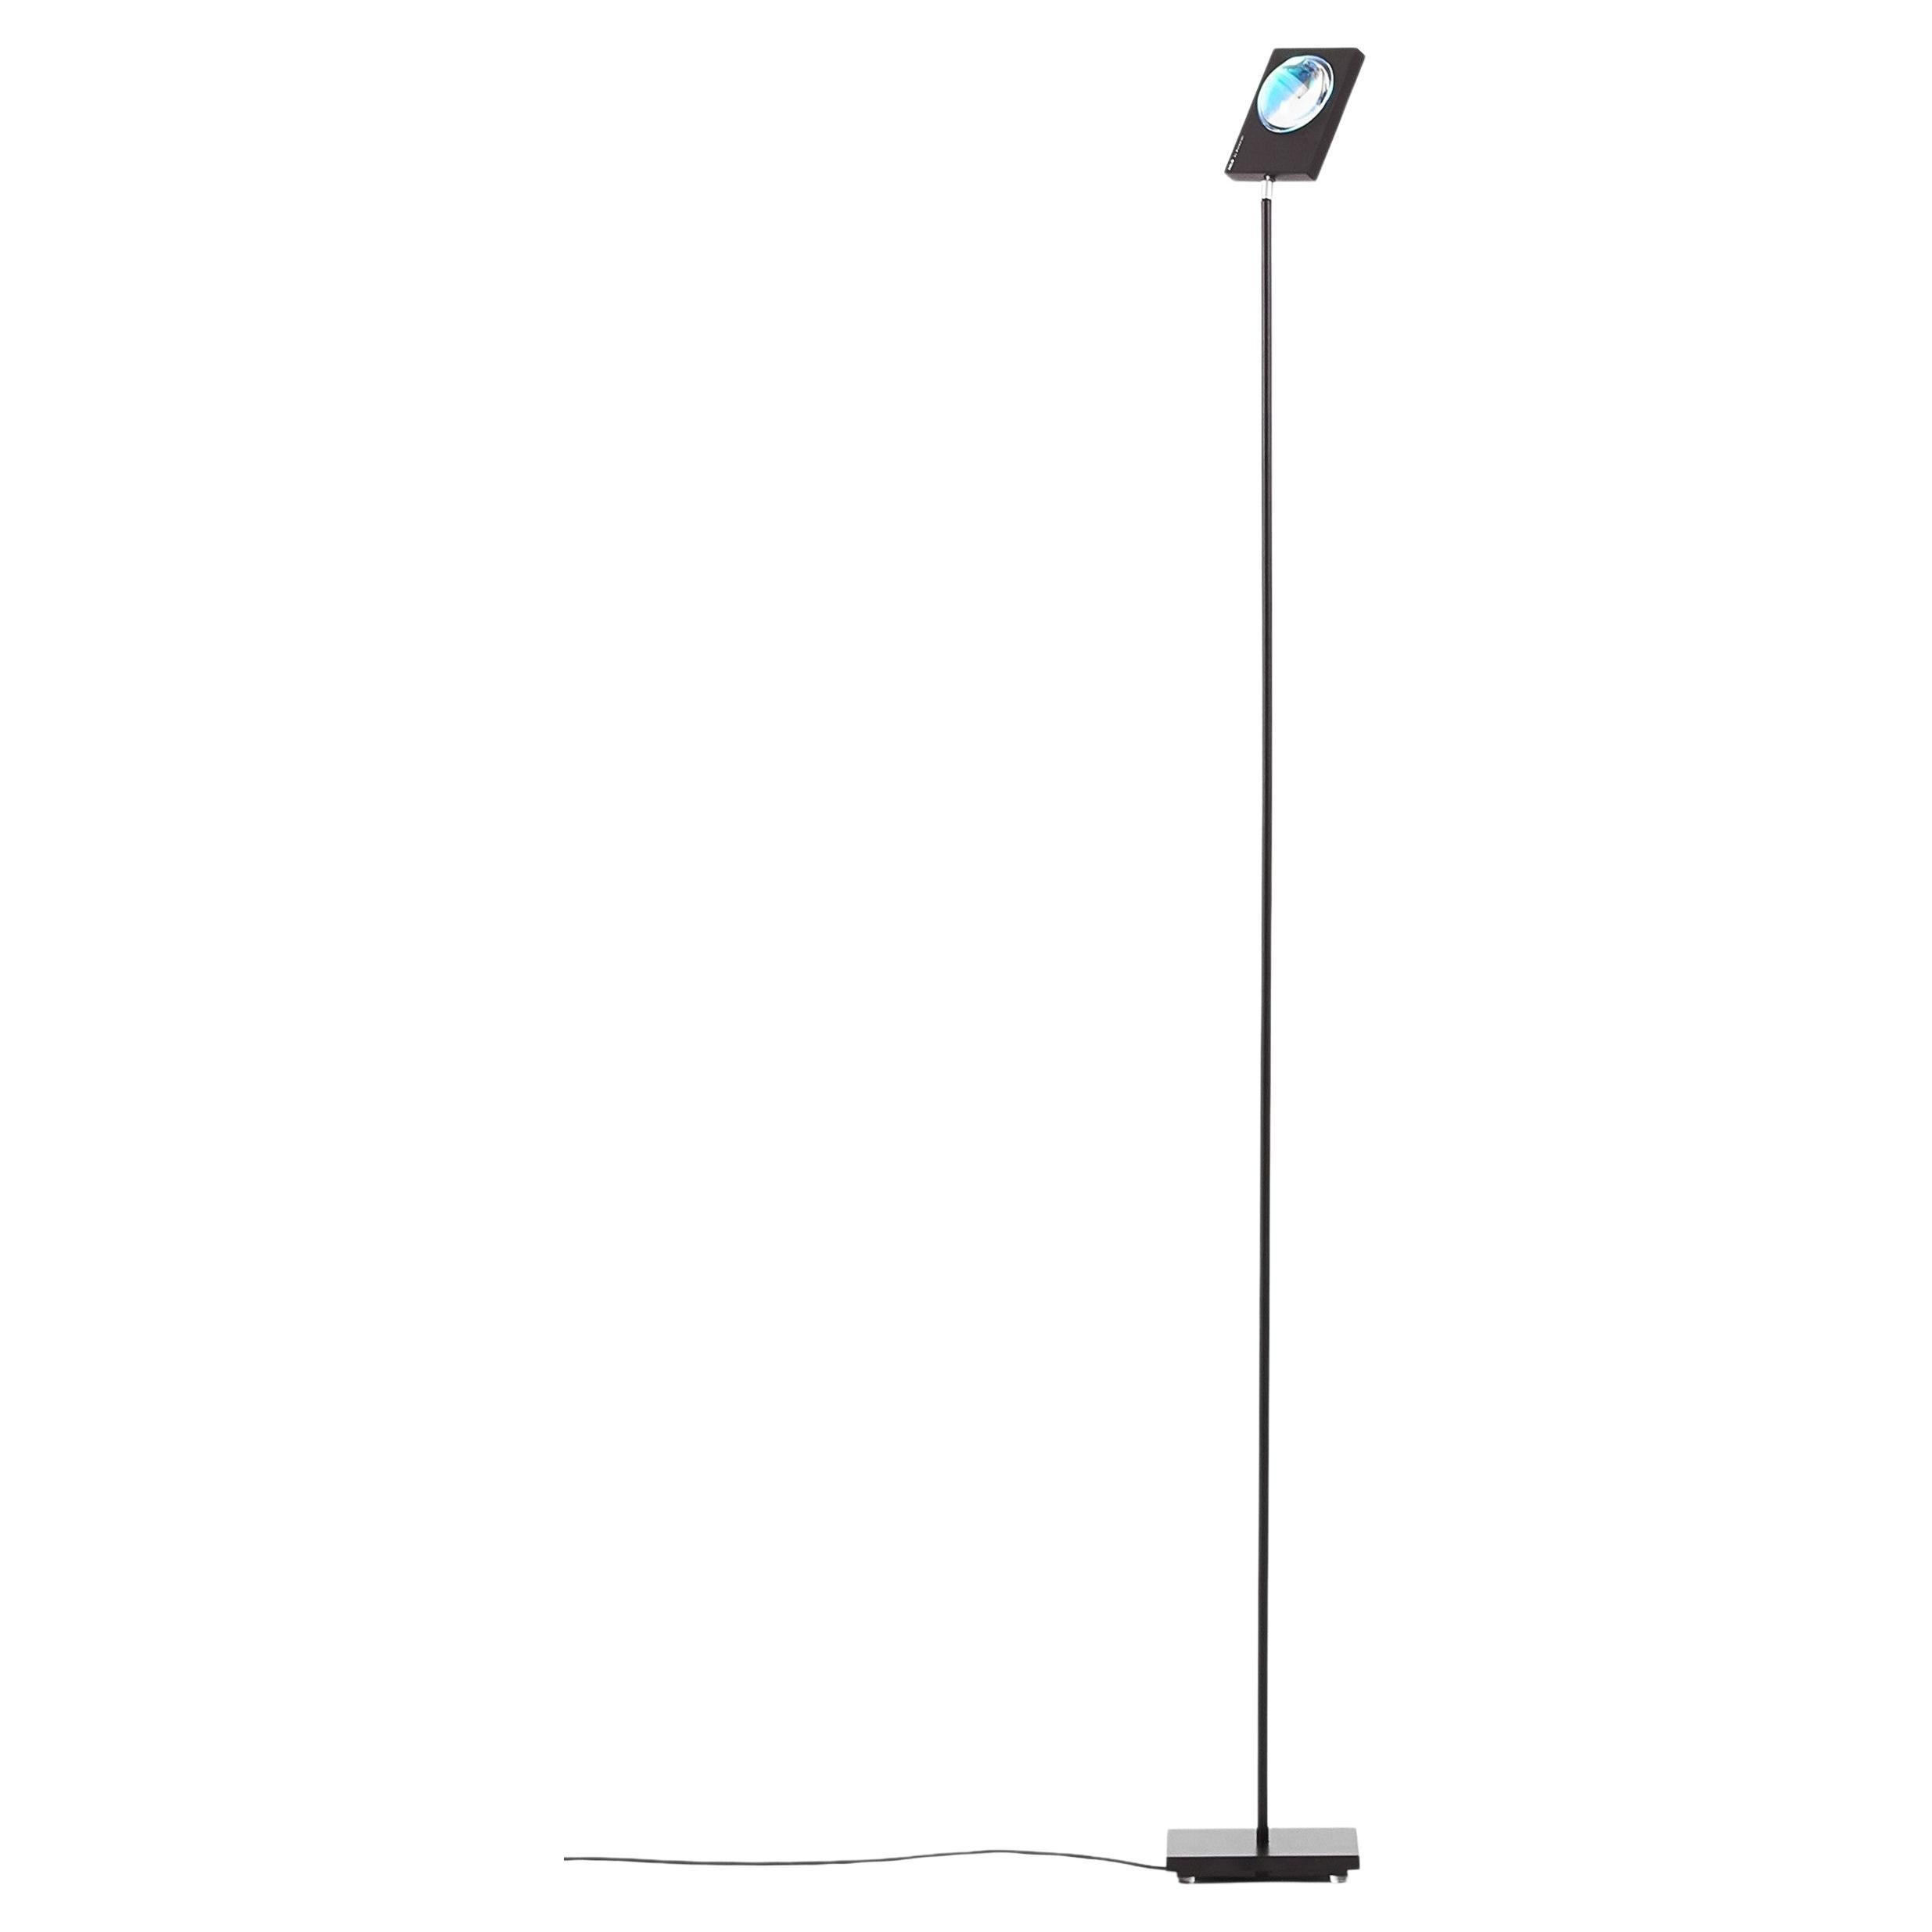 Deep Blue Halo Evo II Floor Lamp by Mandalaki
Dimensions: D 10 x W 13 x H 120 cm
Materials: Aluminium, brass, iron, glass
Available in other light color,

Weight: 3 Kg
Input: 100-240V 50-60Hz
Output: 12V
LED Power: 8W
Lumen: ~ 1000